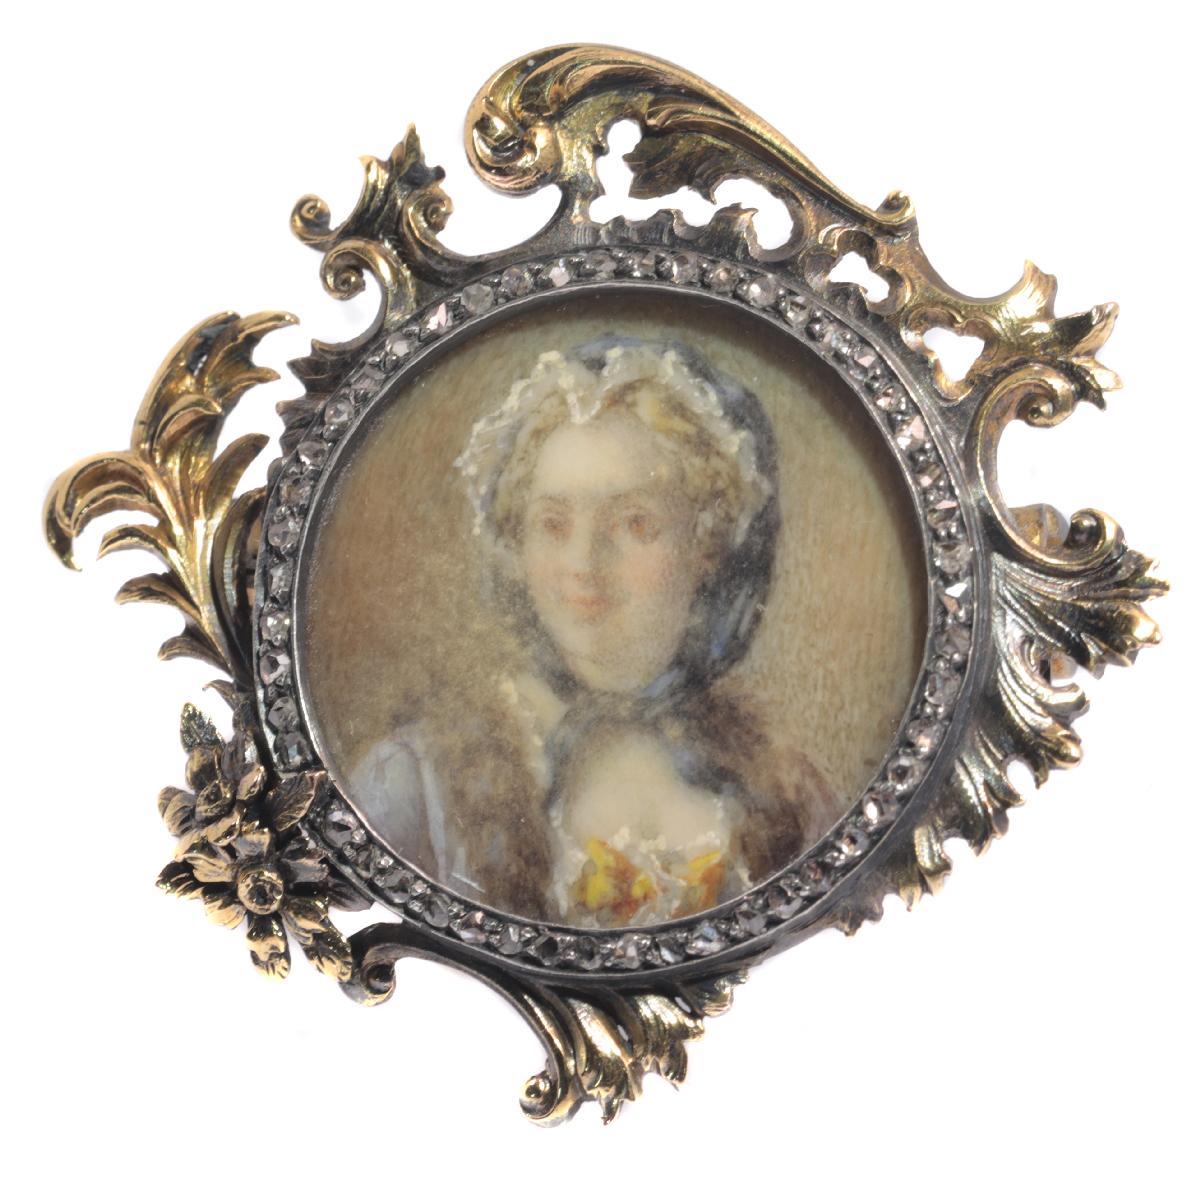 Madame de Pompadour - Madame de Pompadour was a member of the French court and was the official chief mistress of Louis XV from 1745 to 1751, and remained influential as court favourite until her death.

Pompadour took charge of the king's schedule